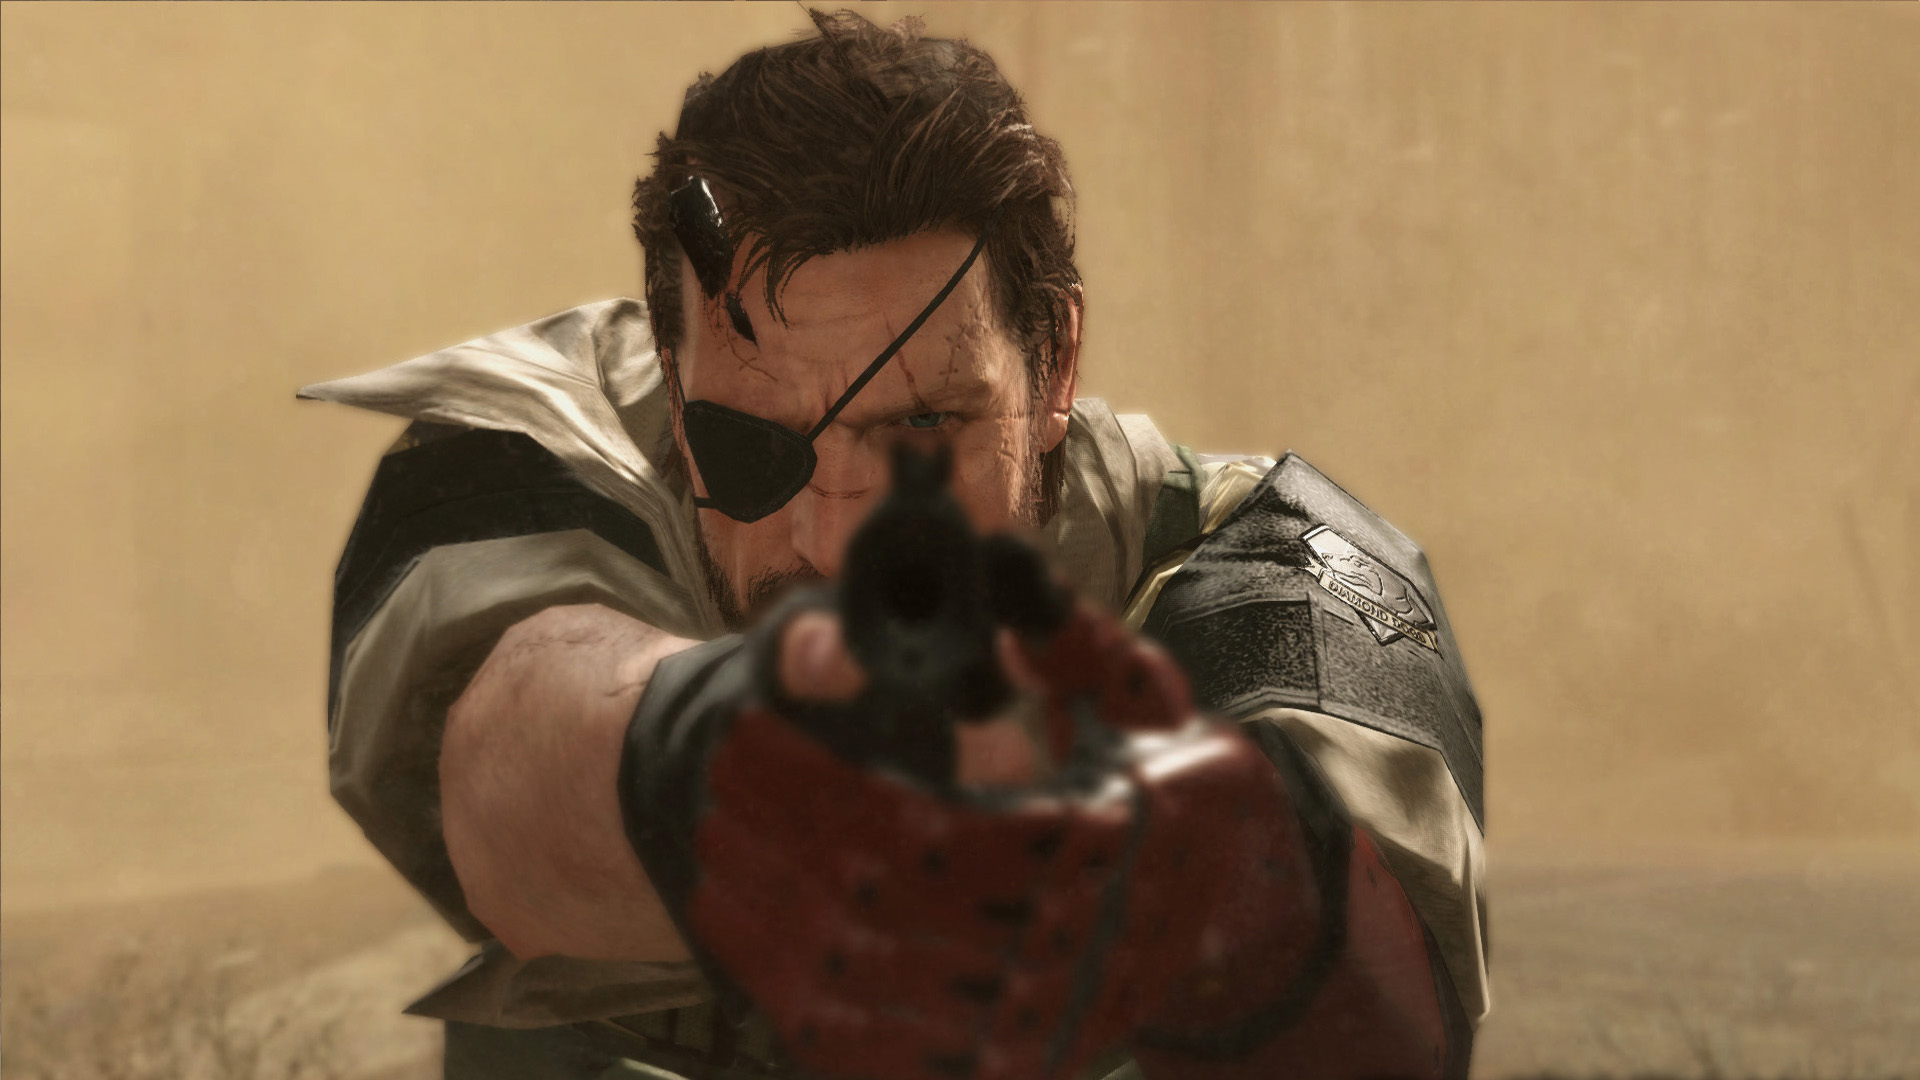 Upcoming video game movies - Metal Gear Solid